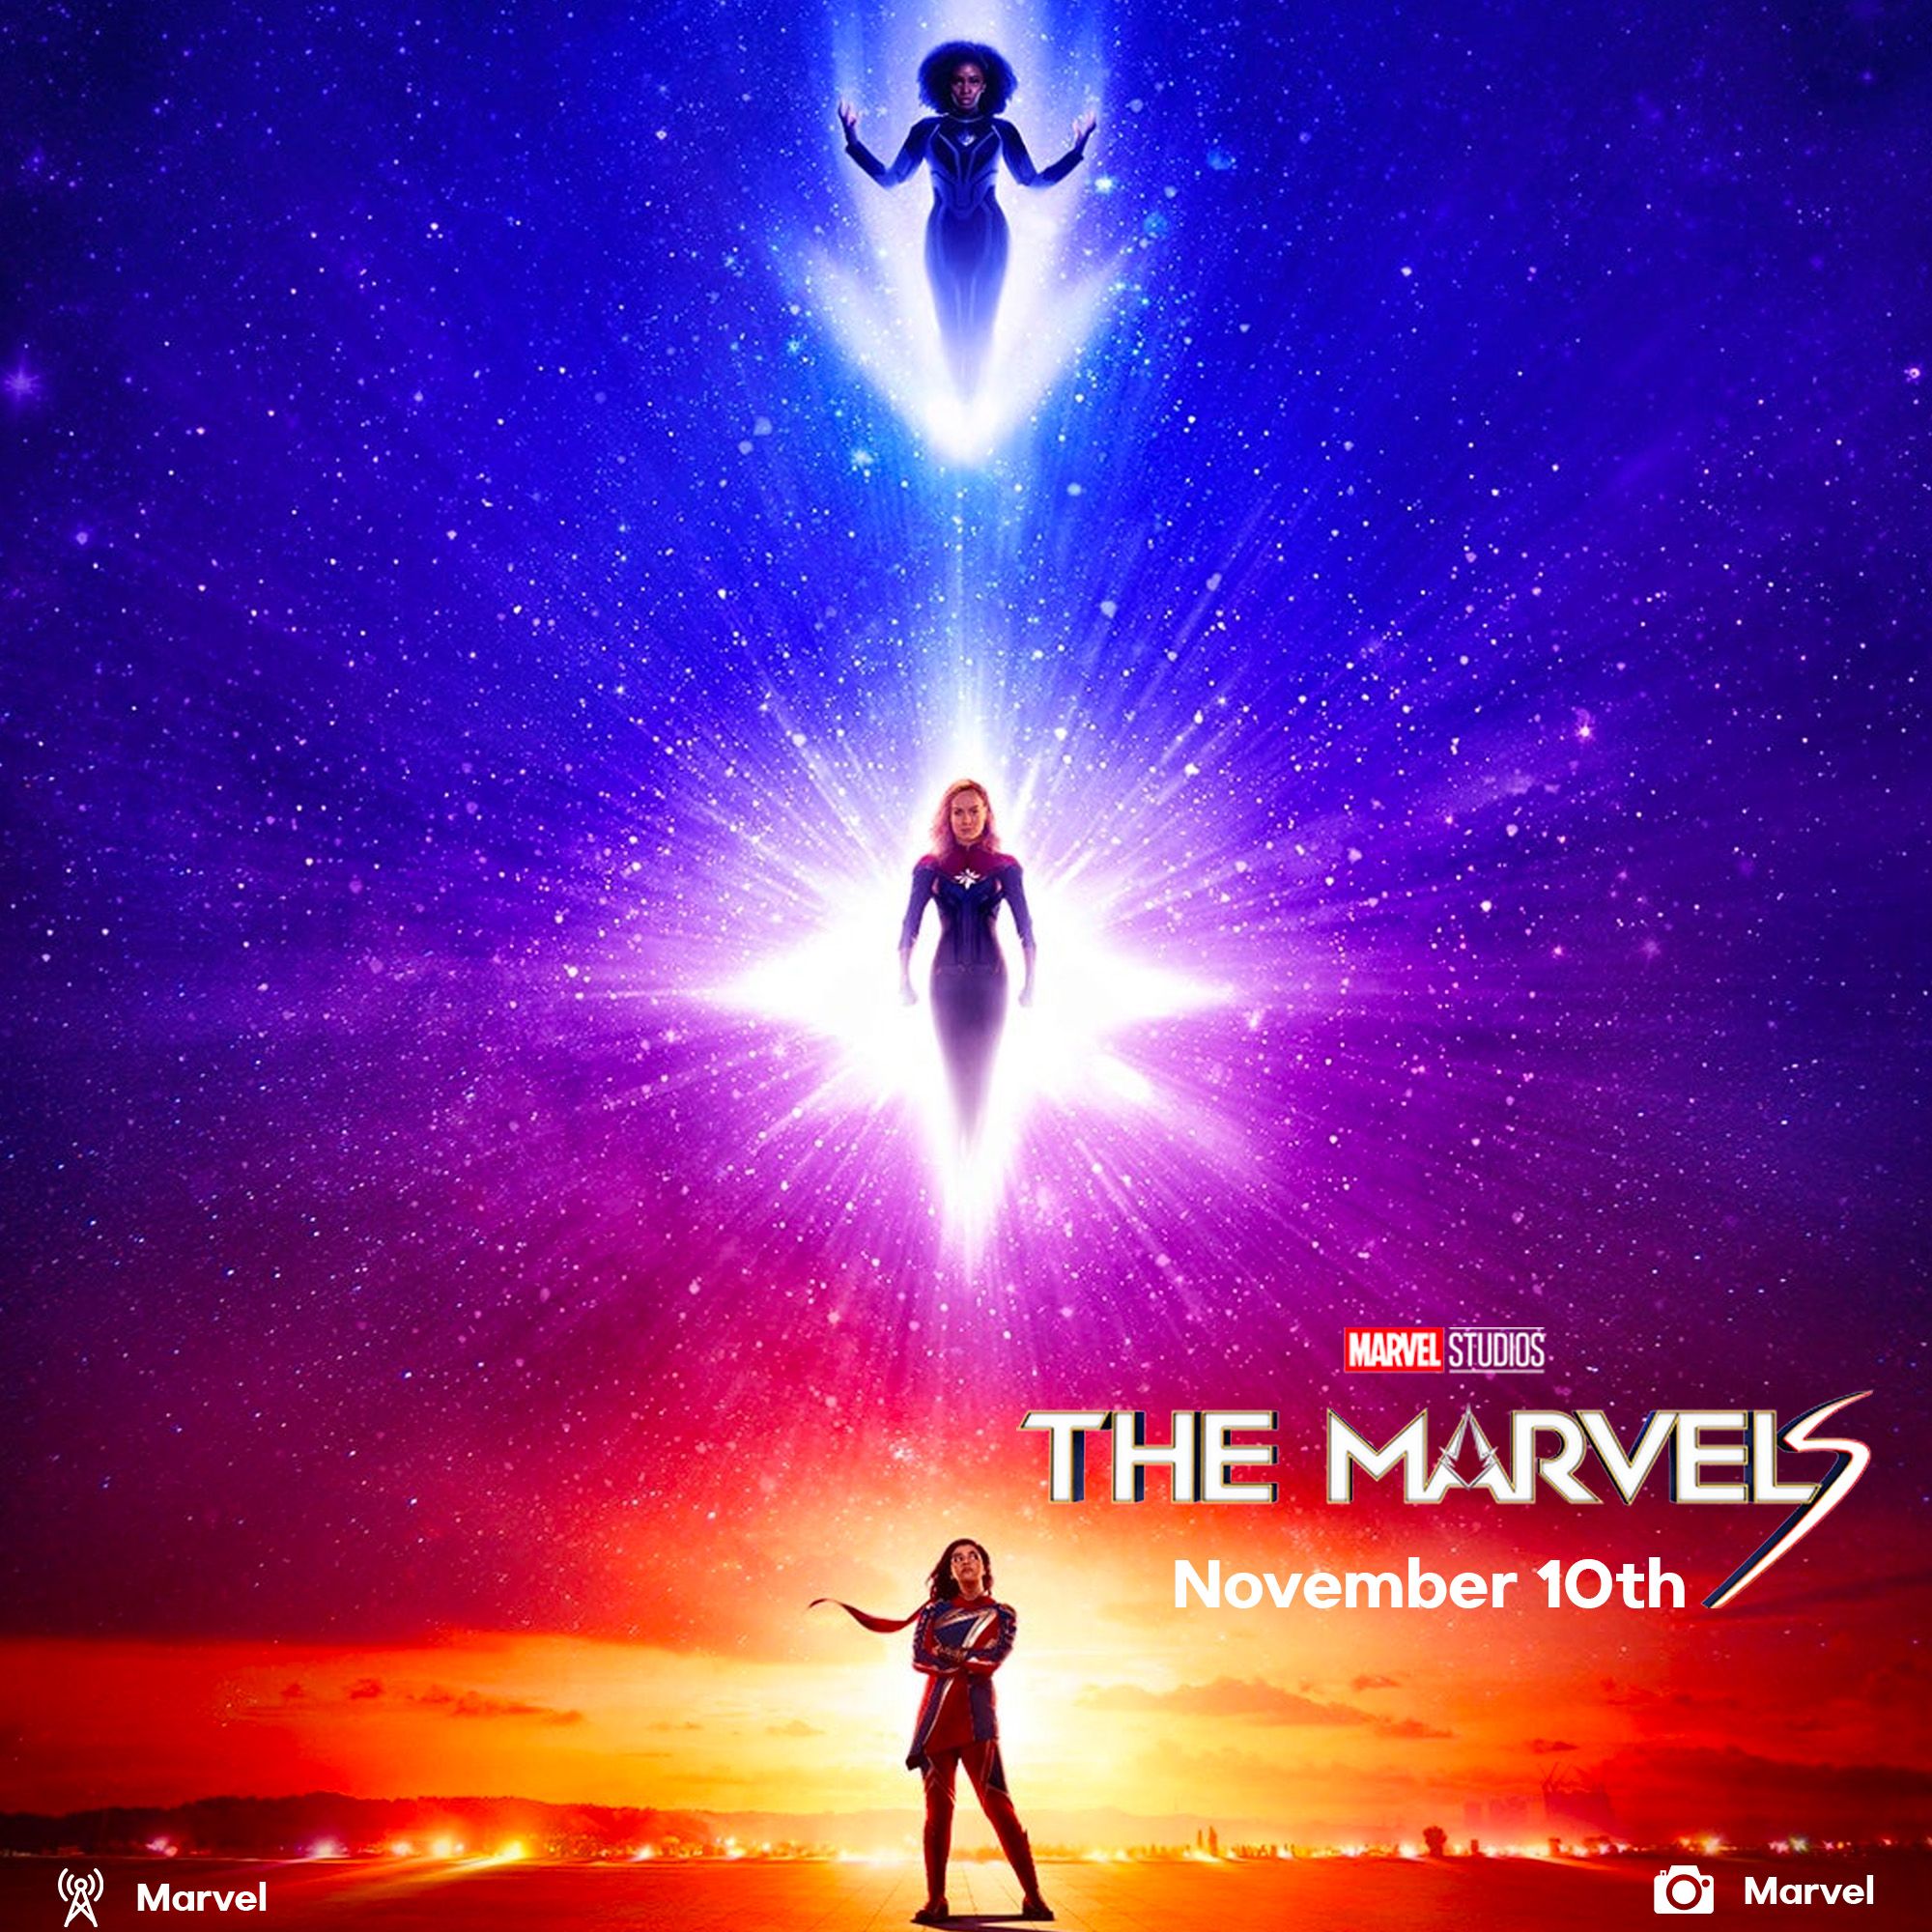 The Marvels trailer